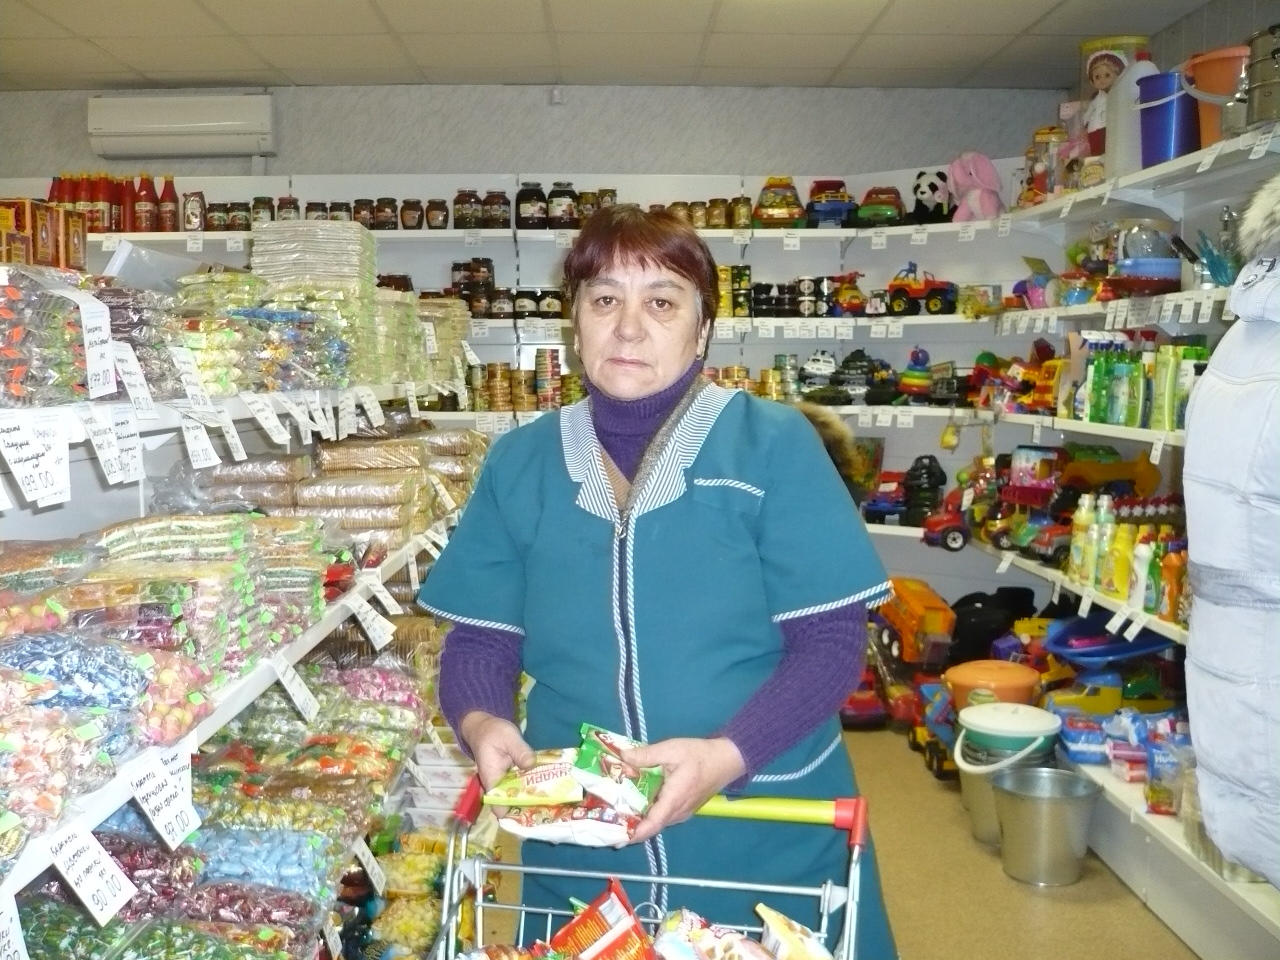 More and more Co-operator shops opening in the Republic of Buryatia